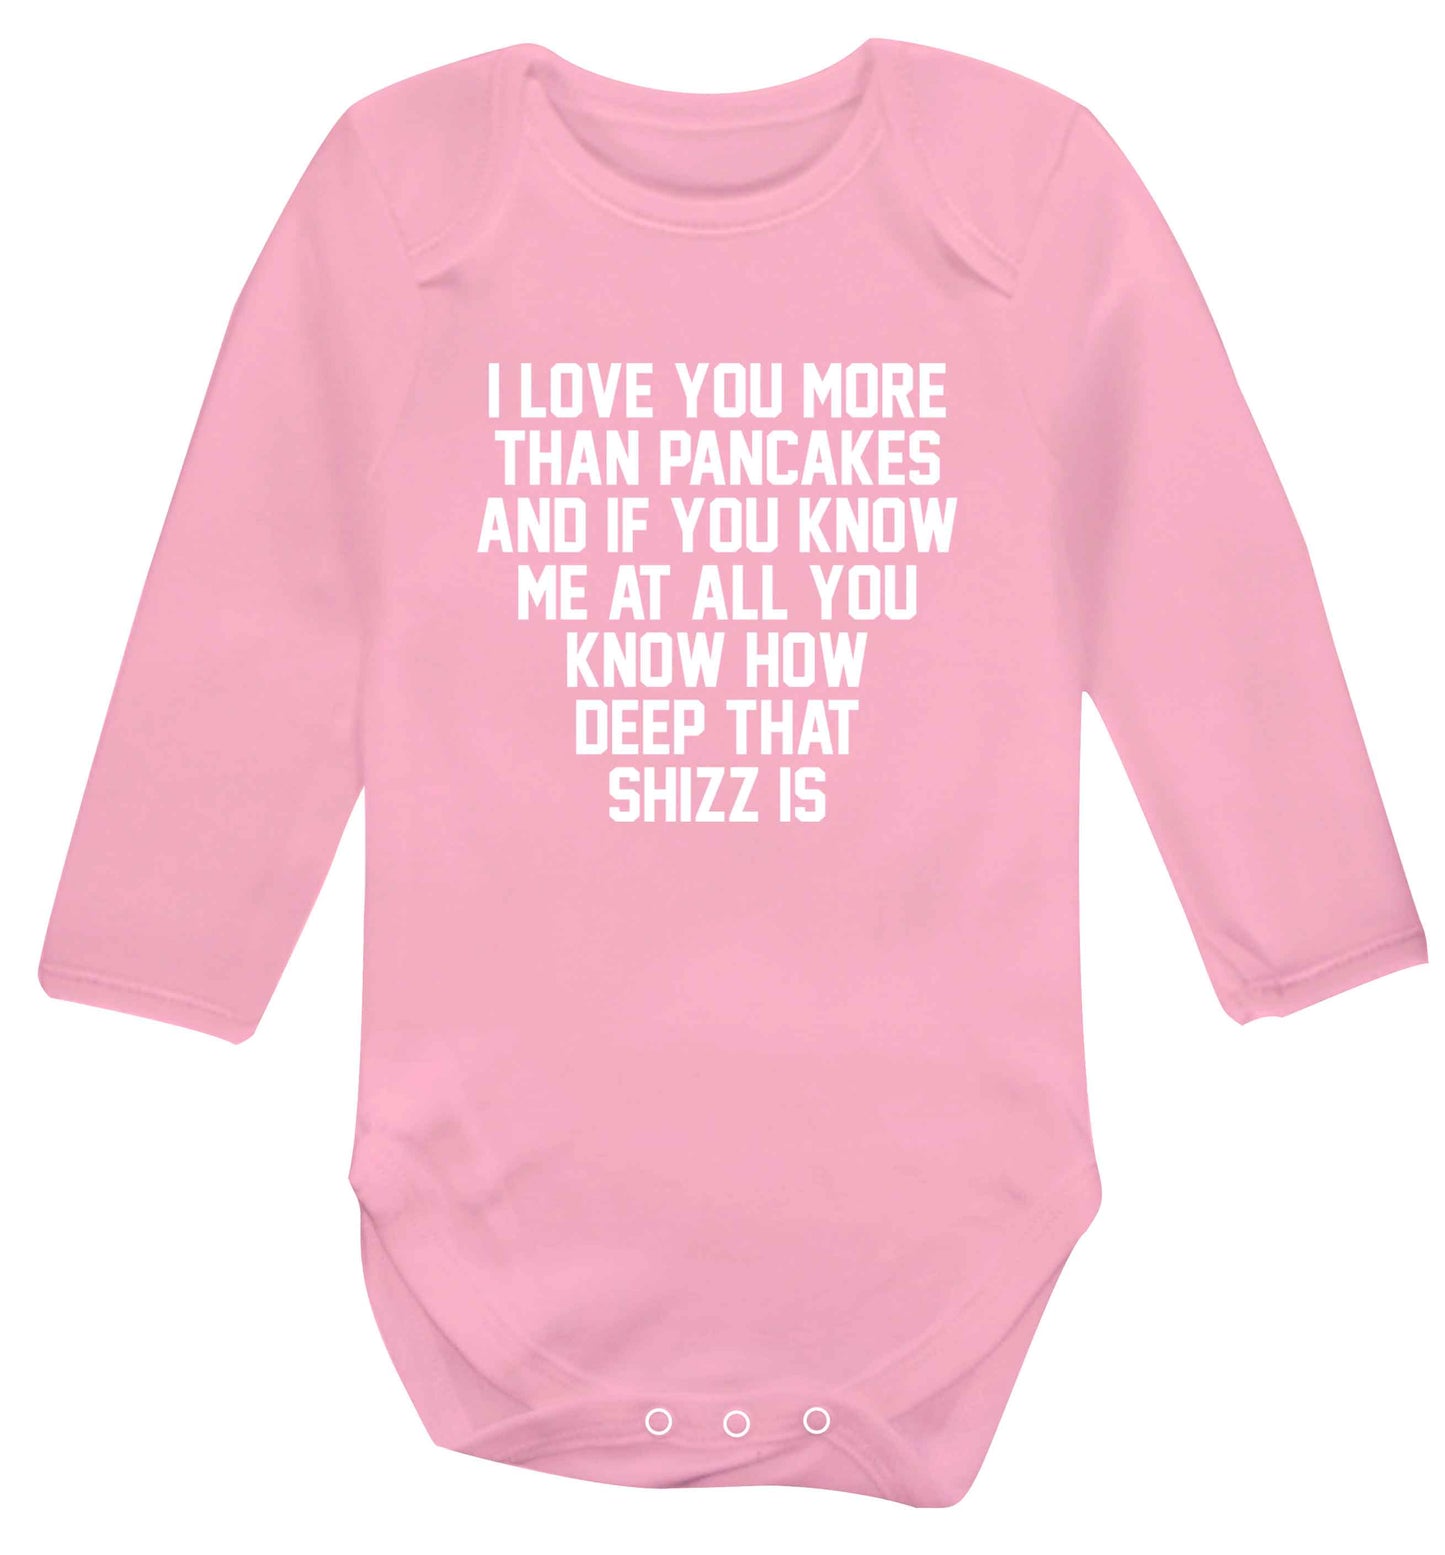 I love you more than pancakes and if you know me at all you know how deep that shizz is baby vest long sleeved pale pink 6-12 months